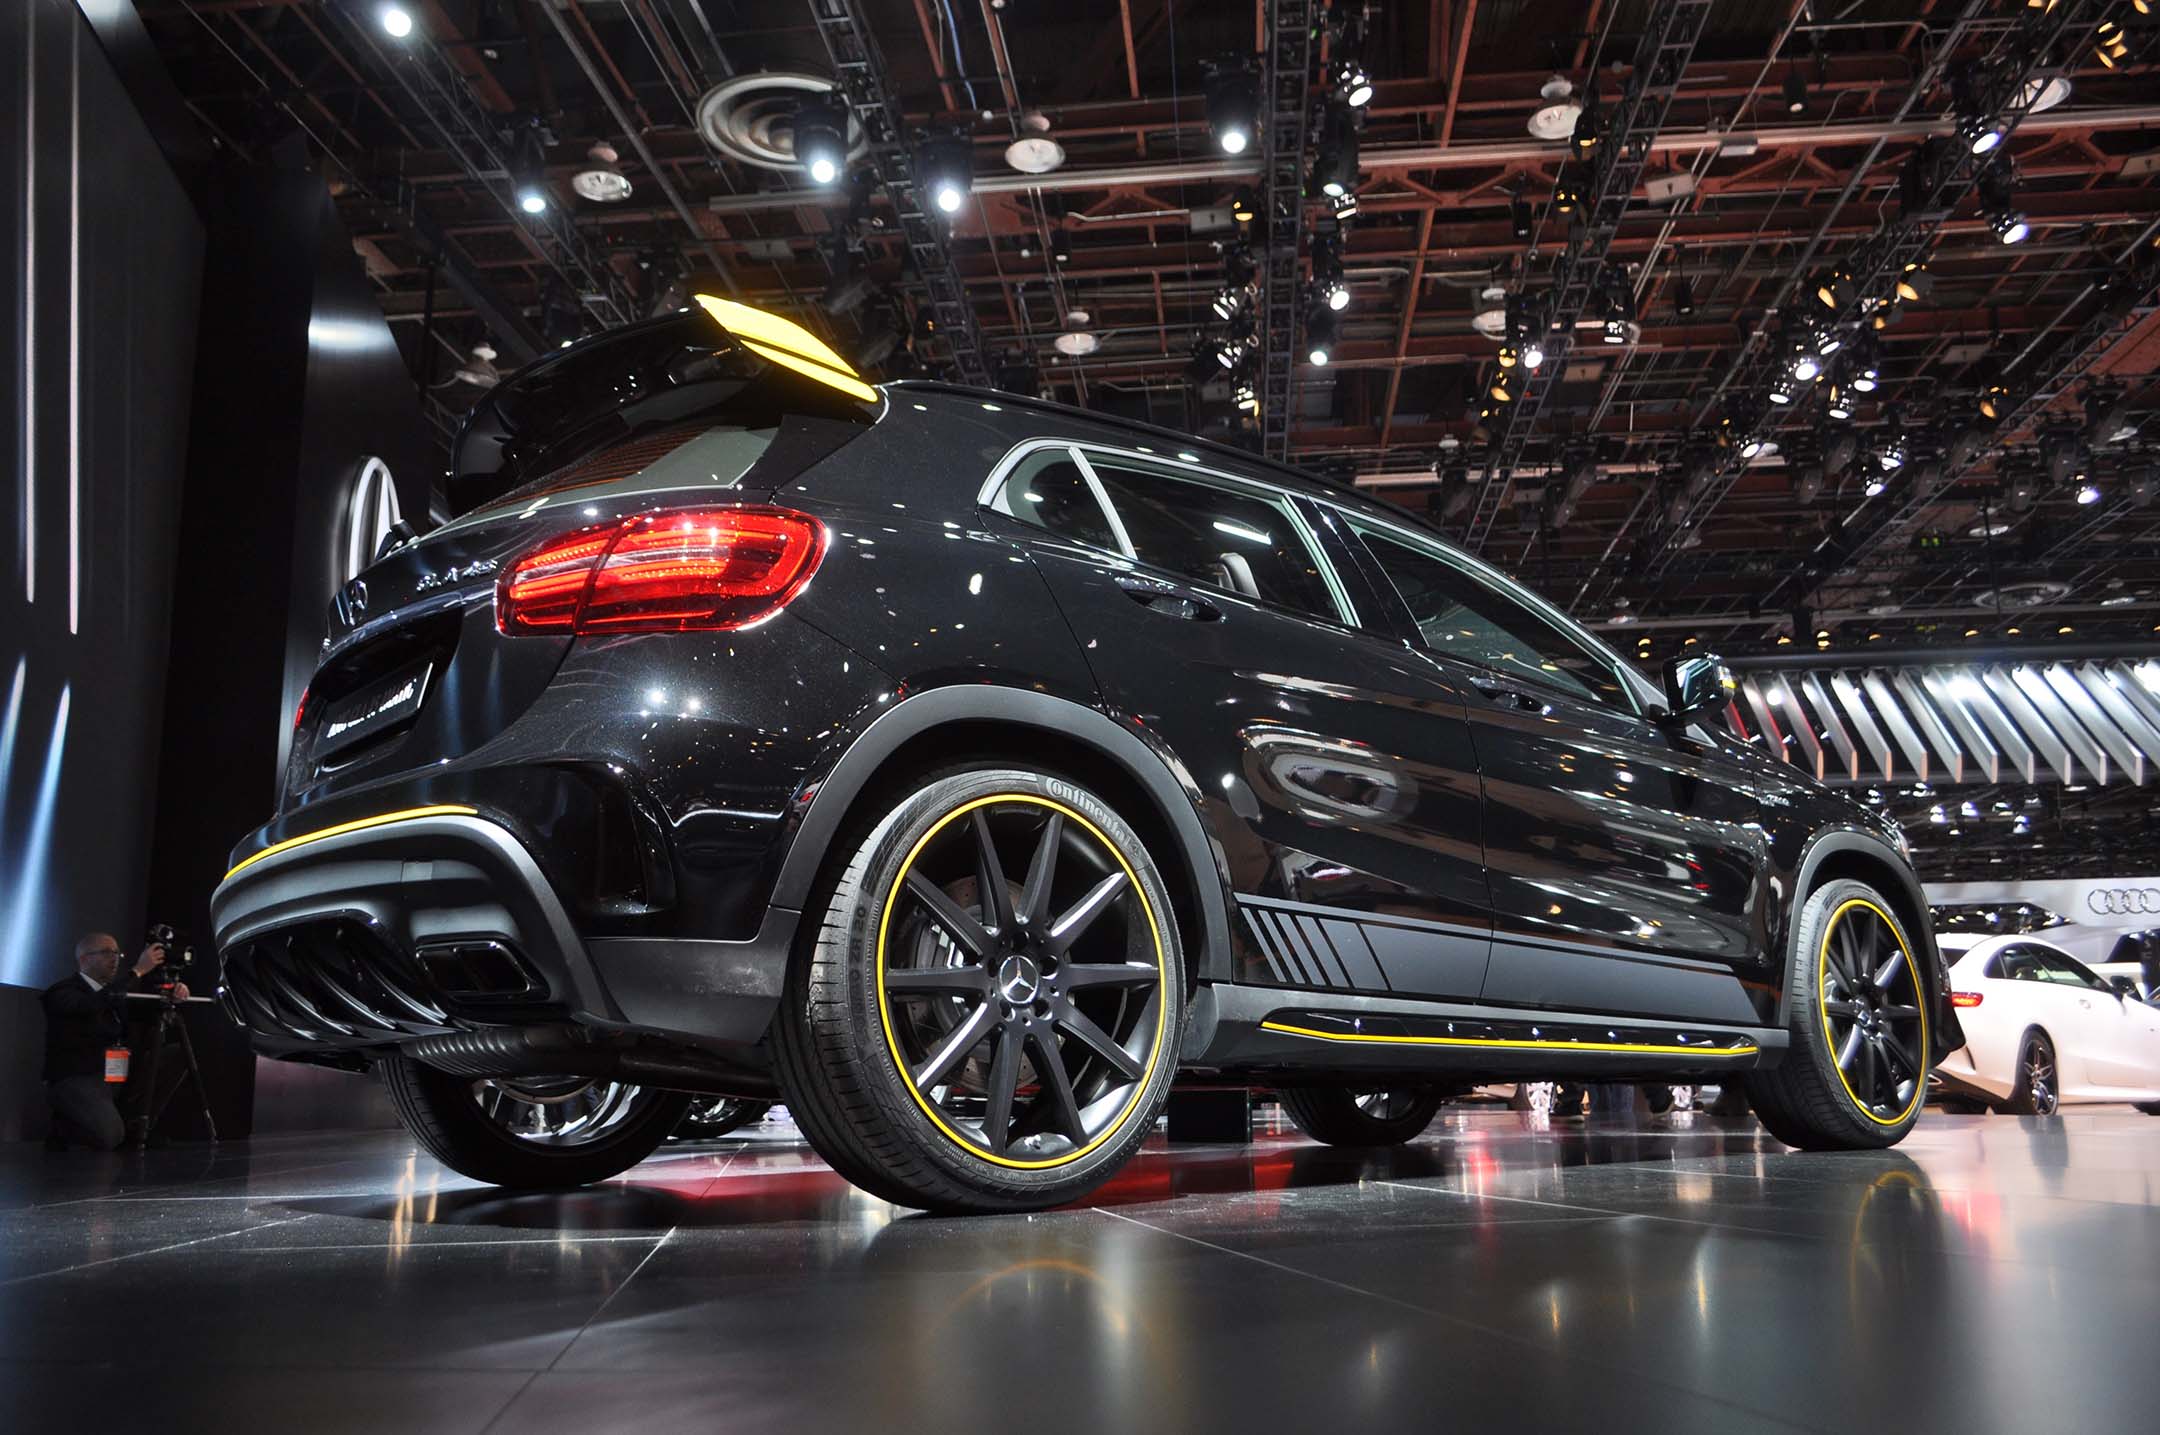 MB: This revised 2018 Mercedes-AMG GLA 45 looks so much like a hot hatch instead of a small SUV that it may very well be the best competitor to the Subaru WRX STi on the market, and easily the one I’d choose. Not that far off in price either, considering all the extra luxury content inside, not even counting the hood badge.